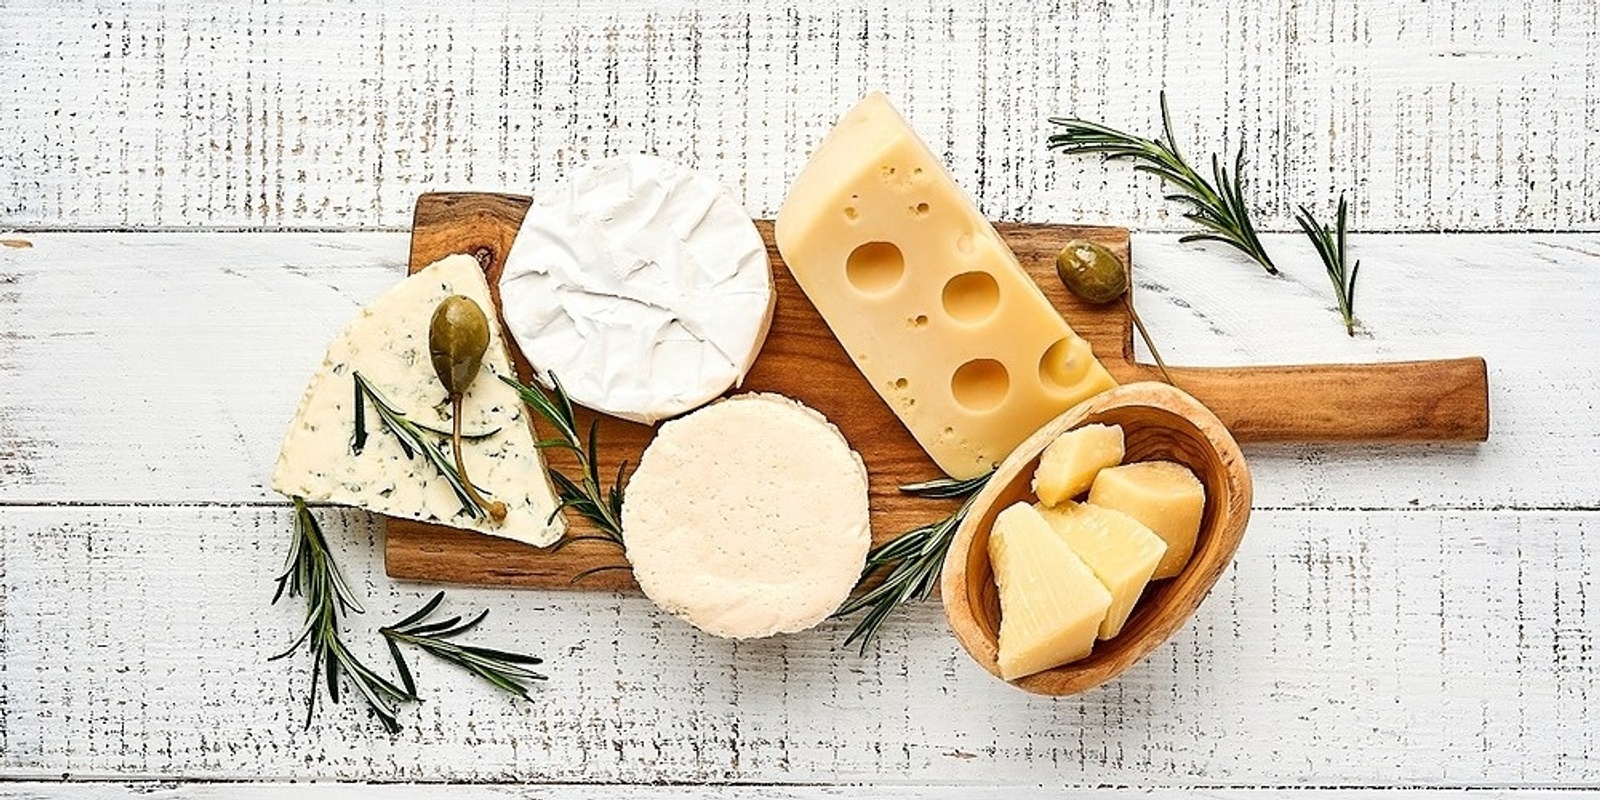 Banner image for Cheese Making Workshop with Charing Cross Dairy & The Urban Cheese Company- Lincoln Event Centre 